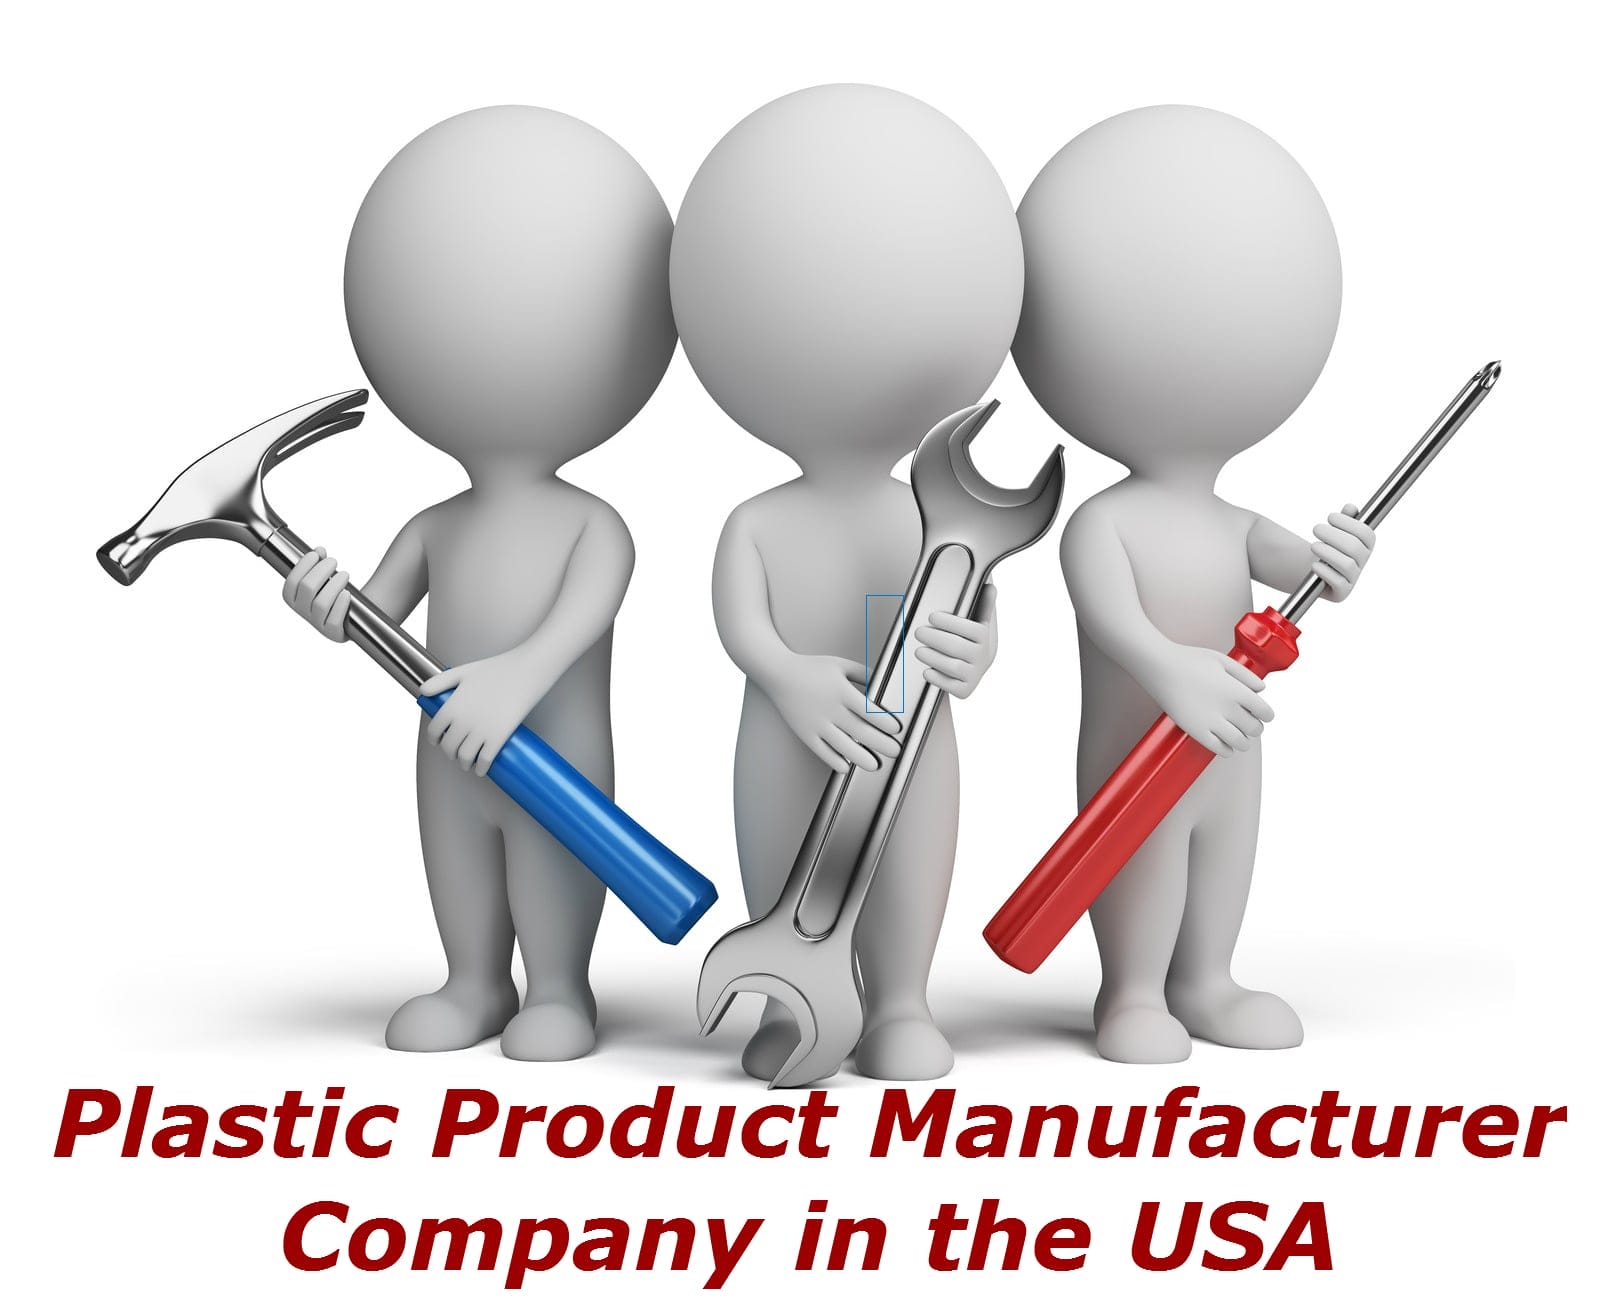 Product Manufacturing Company